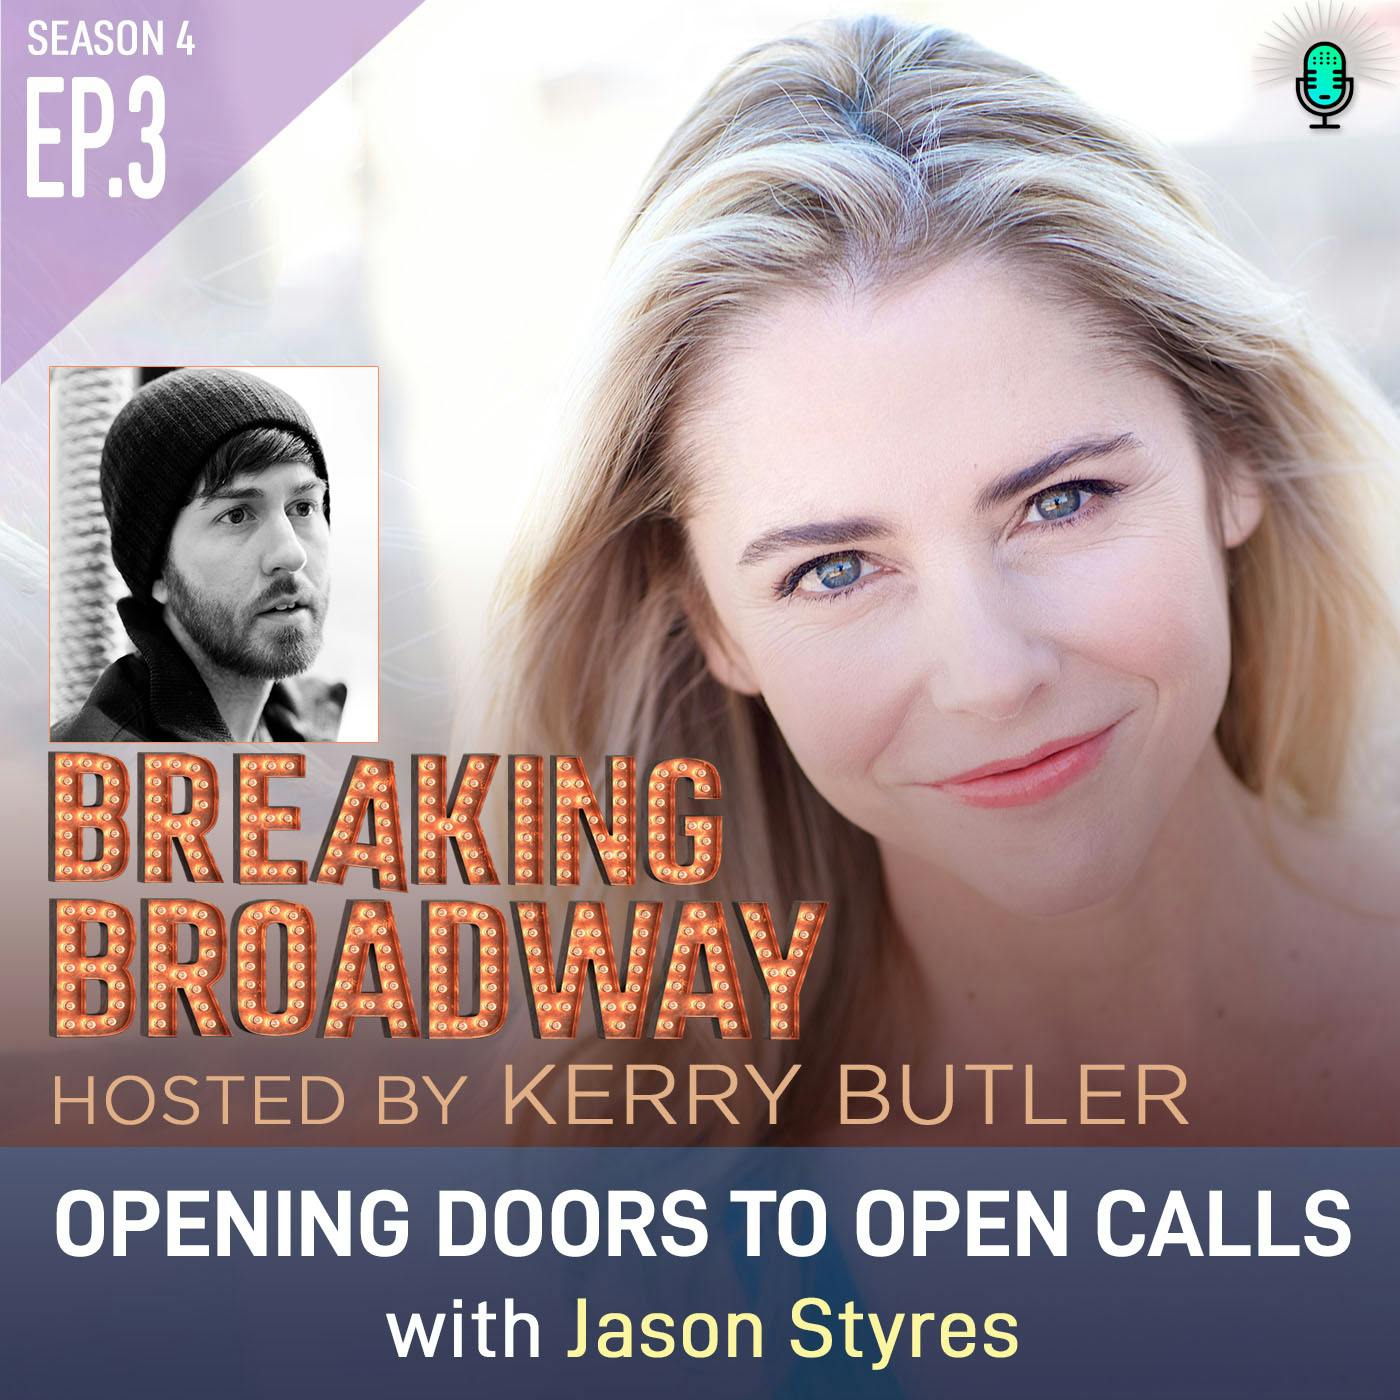 S4 EP3 Opening Doors to Open Calls with Jason Styres - Part 1